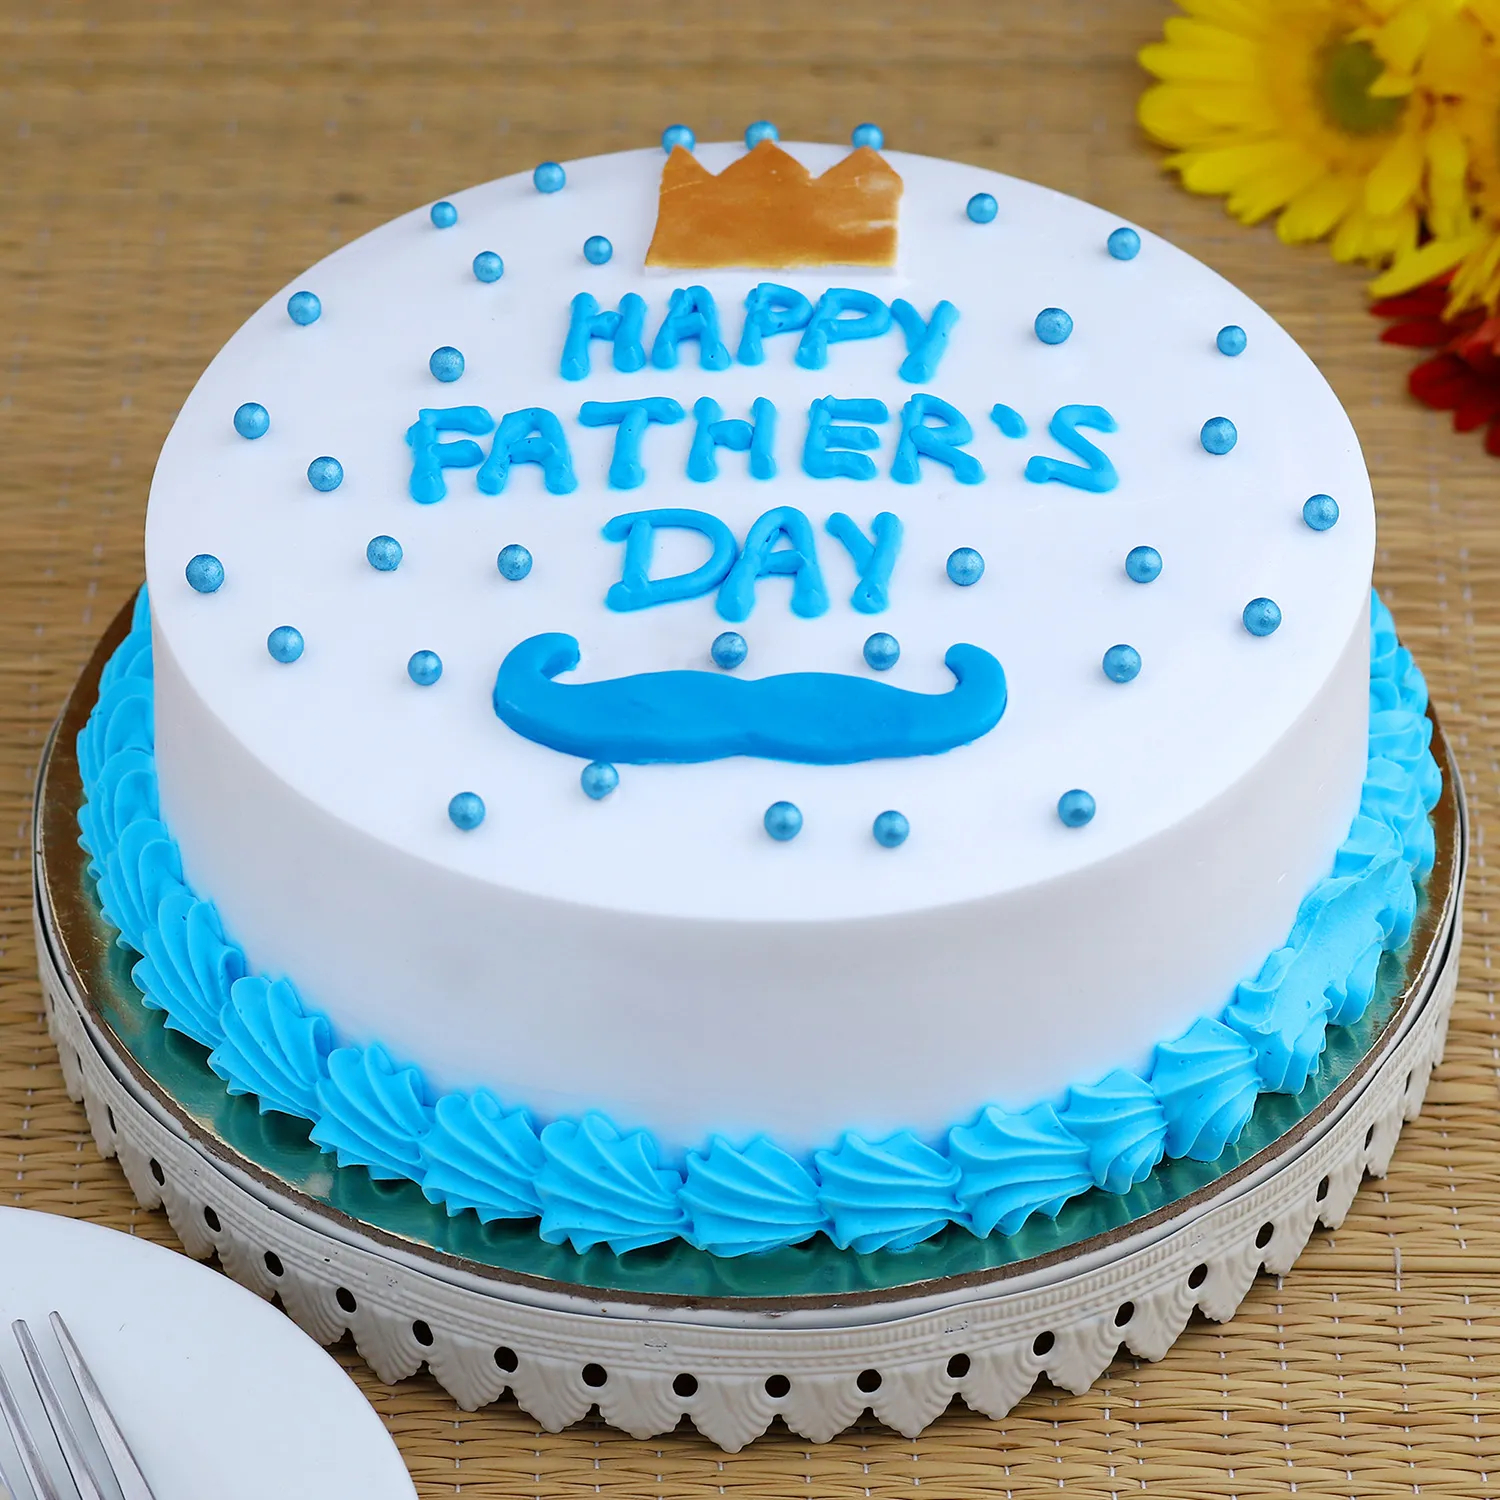 Simple Fathers Day Cakes - CakeCentral.com